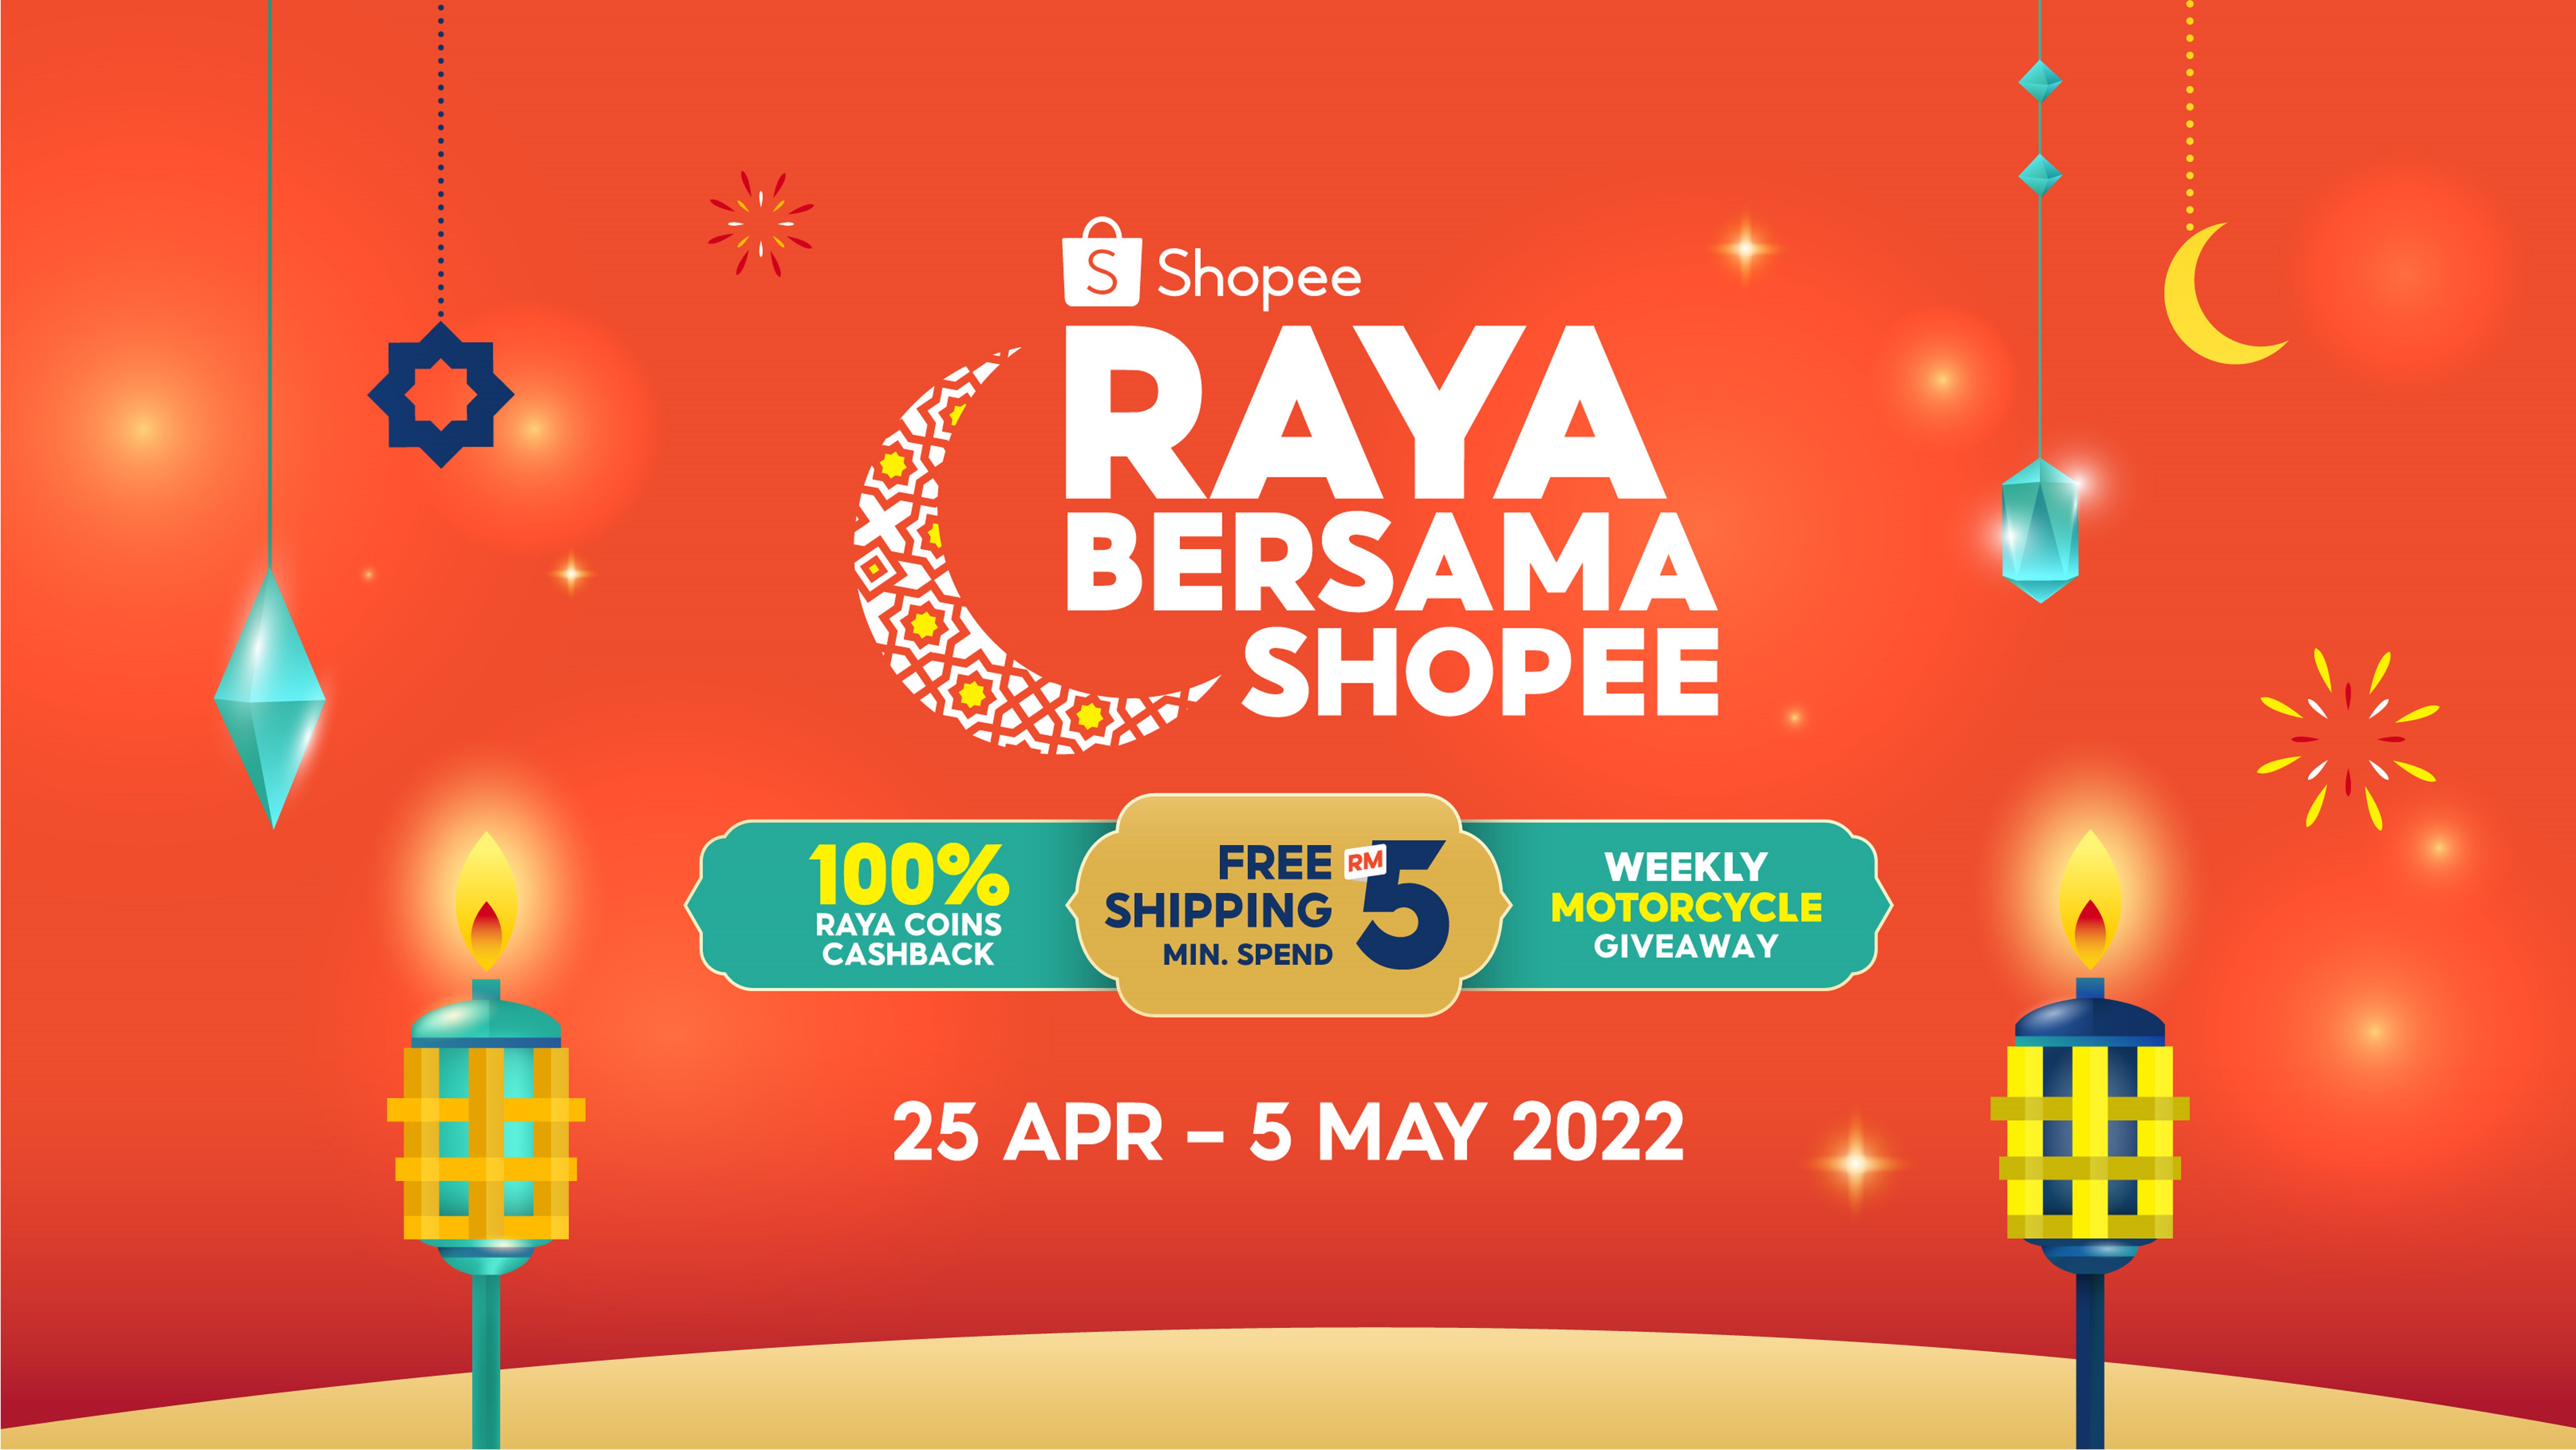 Enliven your Raya with Shopee